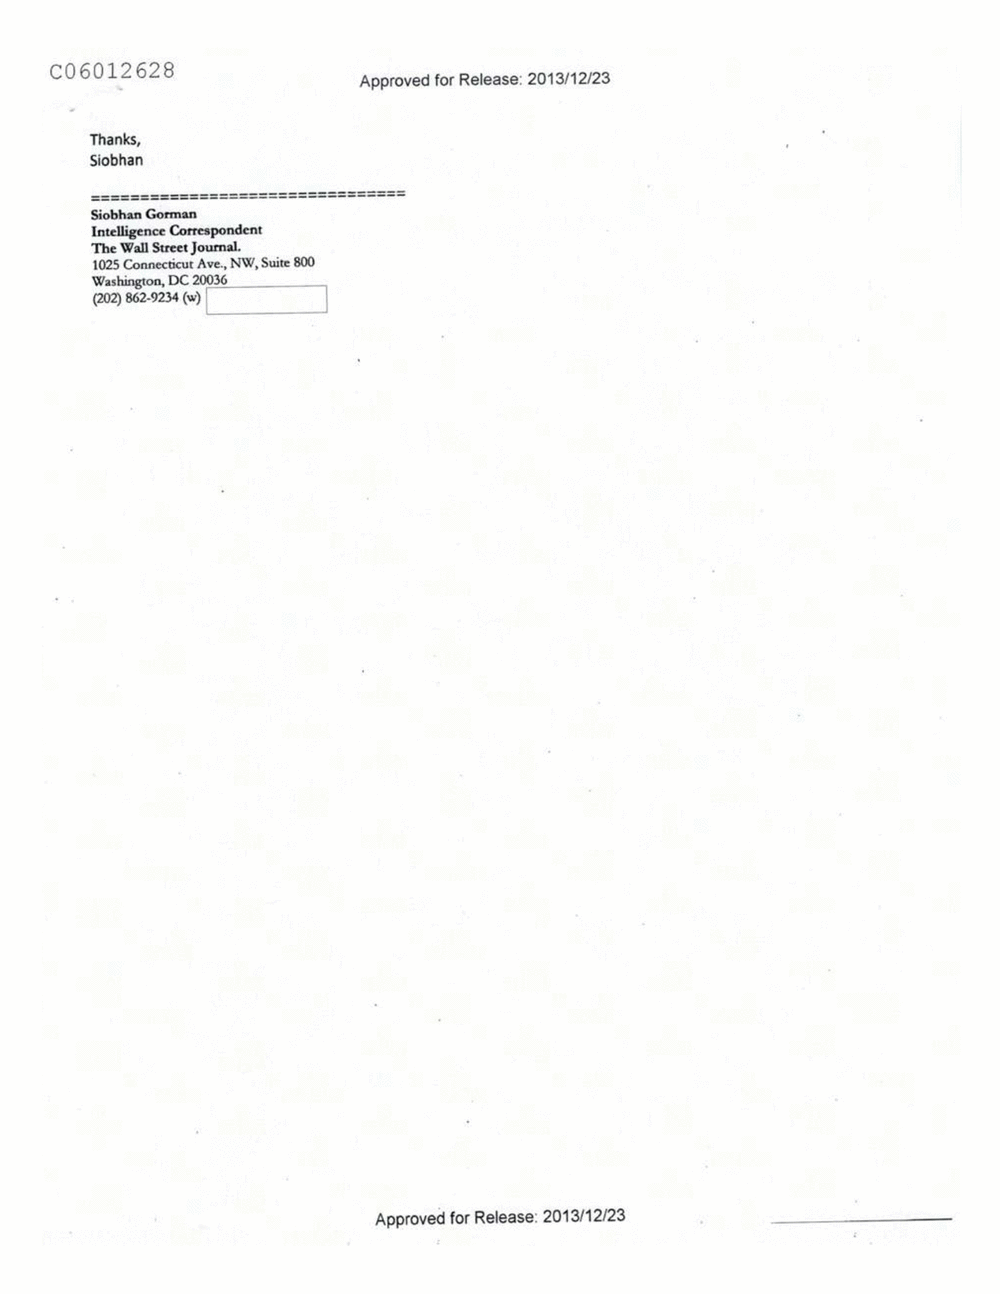 Page 185 from Email Correspondence Between Reporters and CIA Flacks